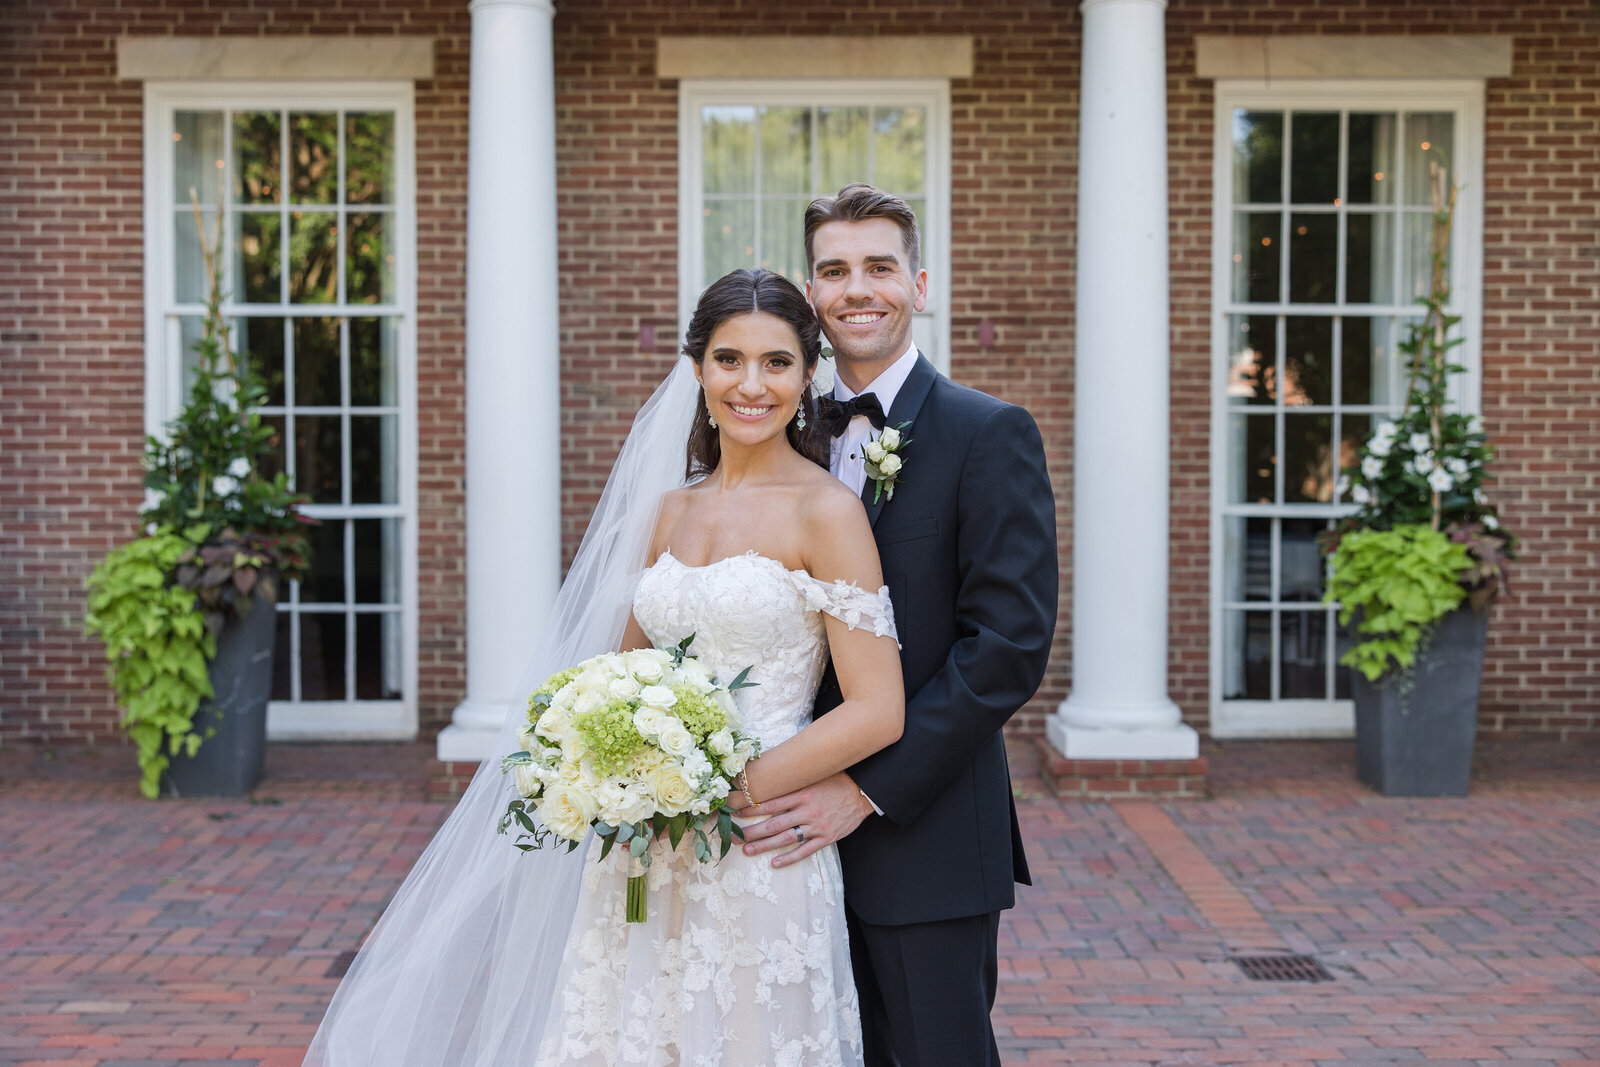 Tidewater Inn wedding in Easton Maryland photo of couple in courtyard by Christa Rae Photography